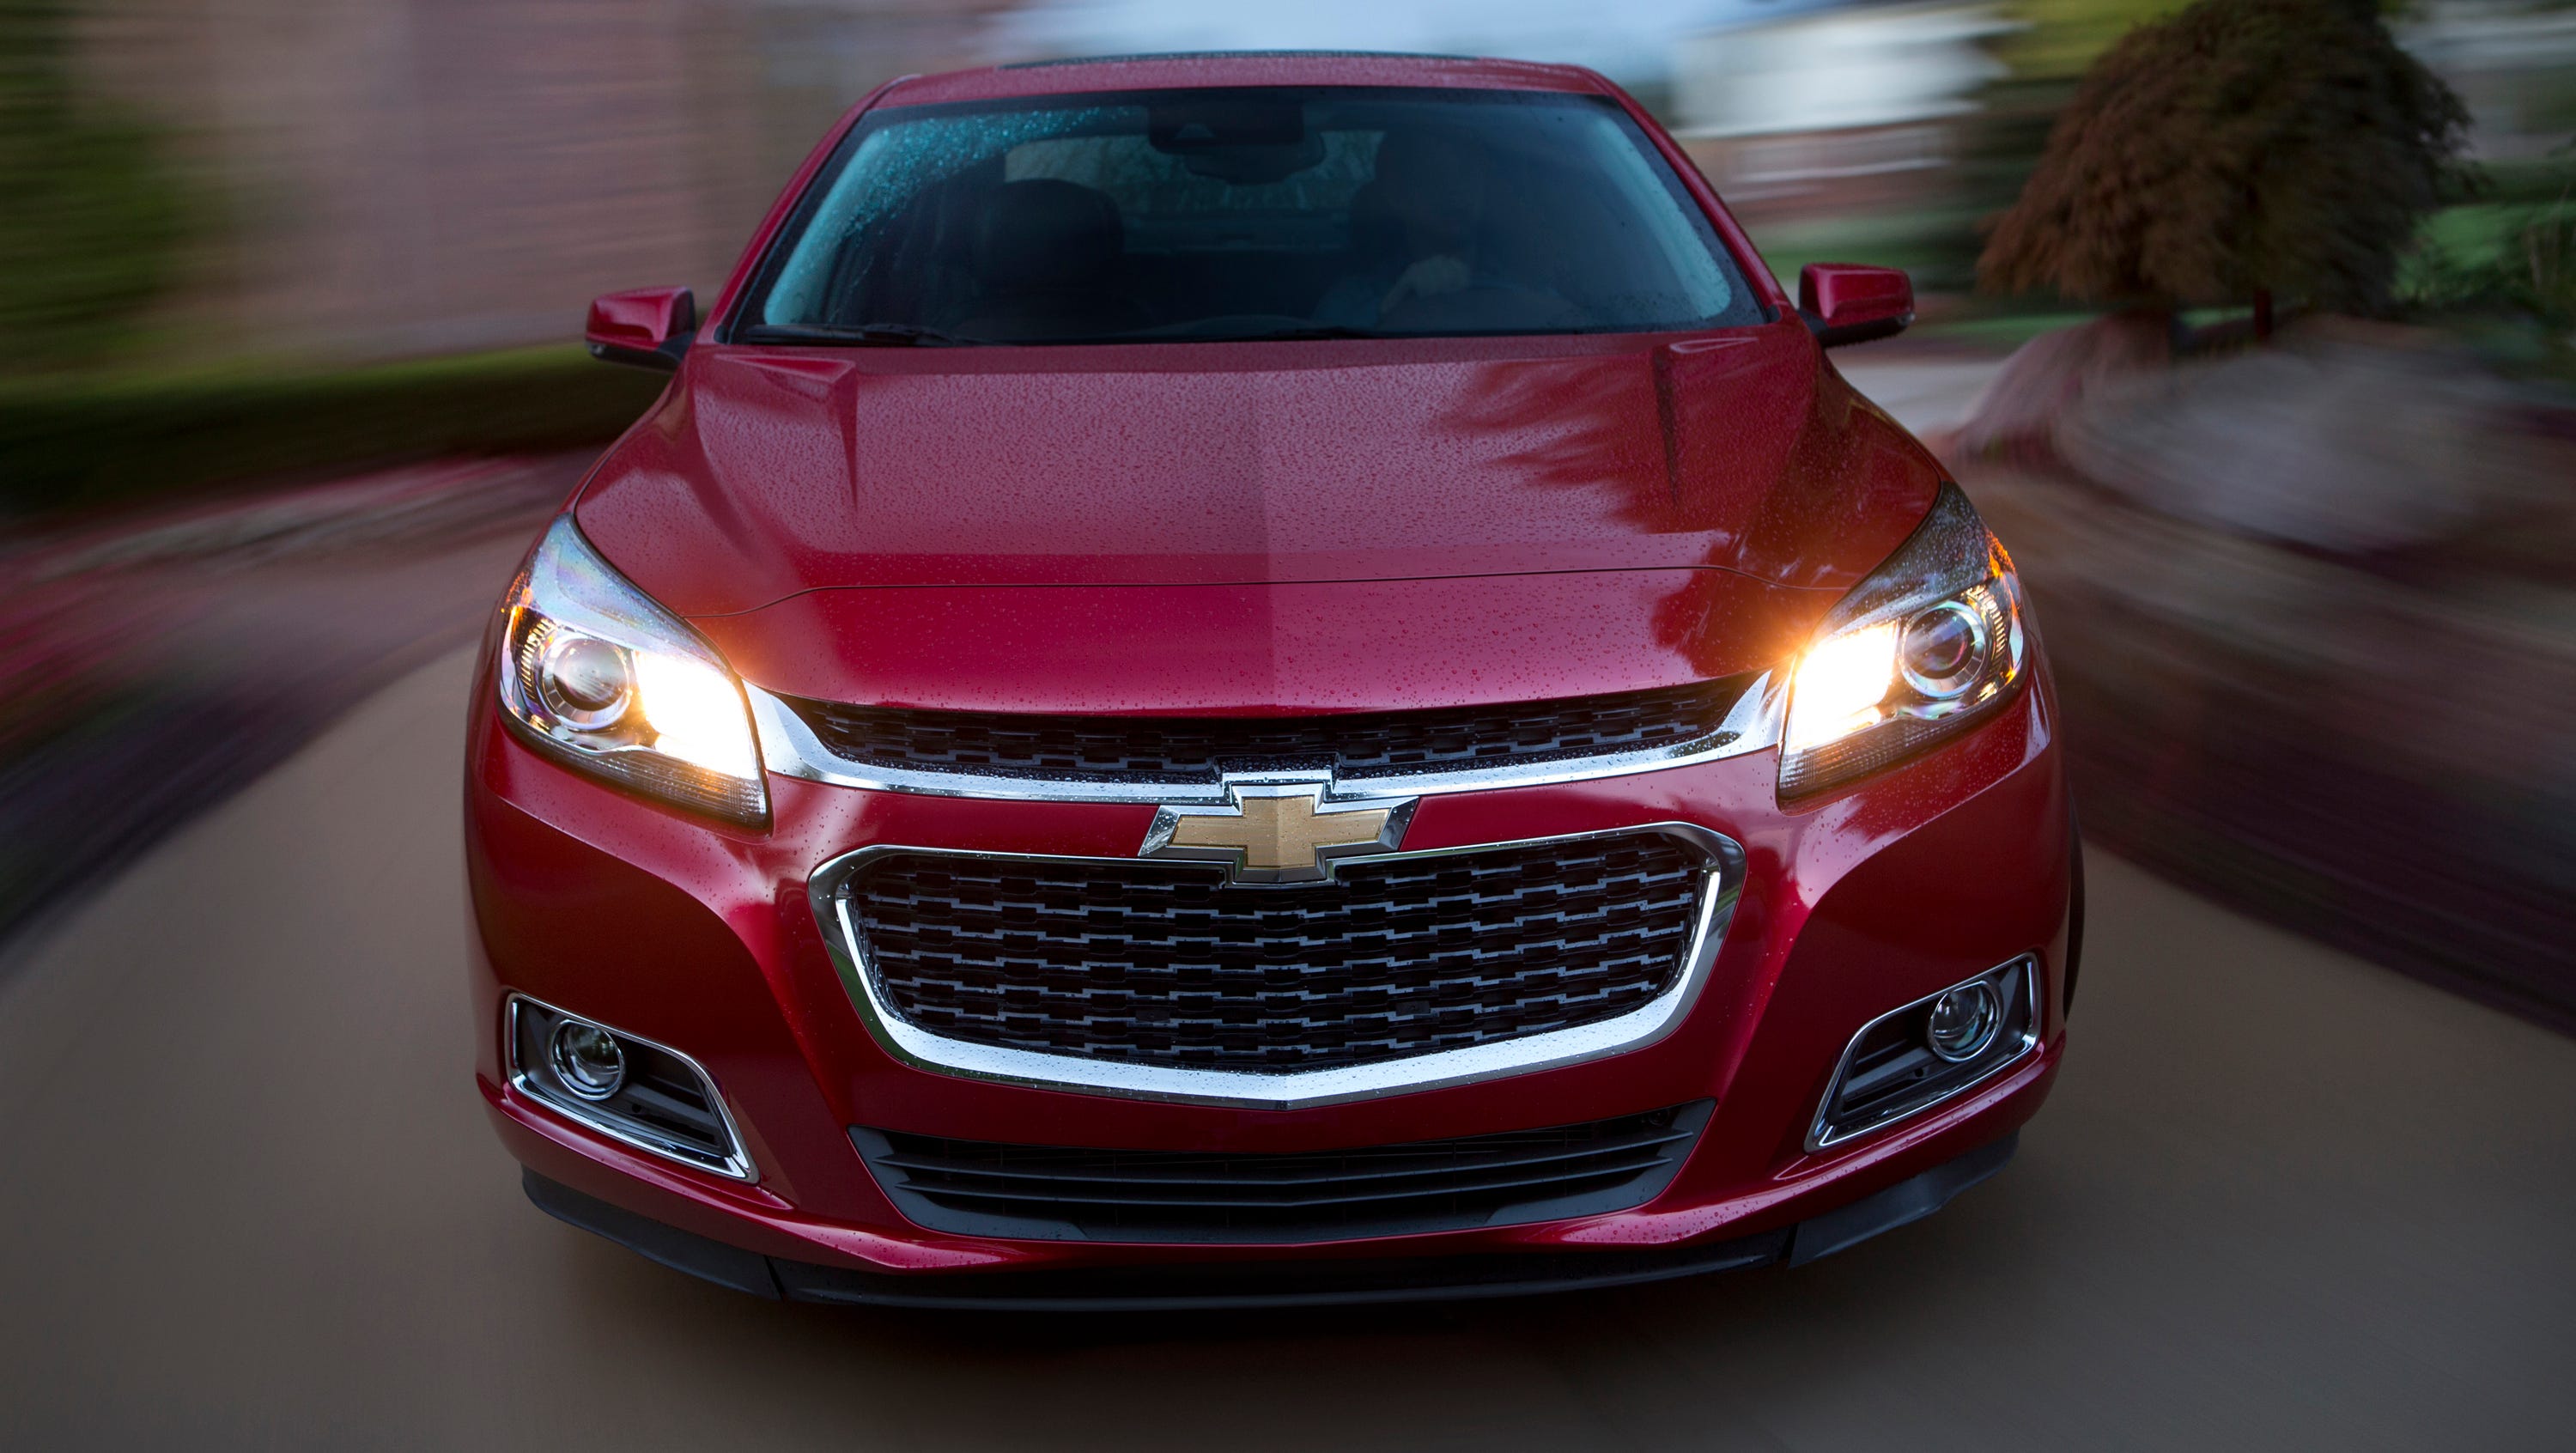 Auto review: 2014 Chevrolet Malibu is a historic value compared to its  forefathers